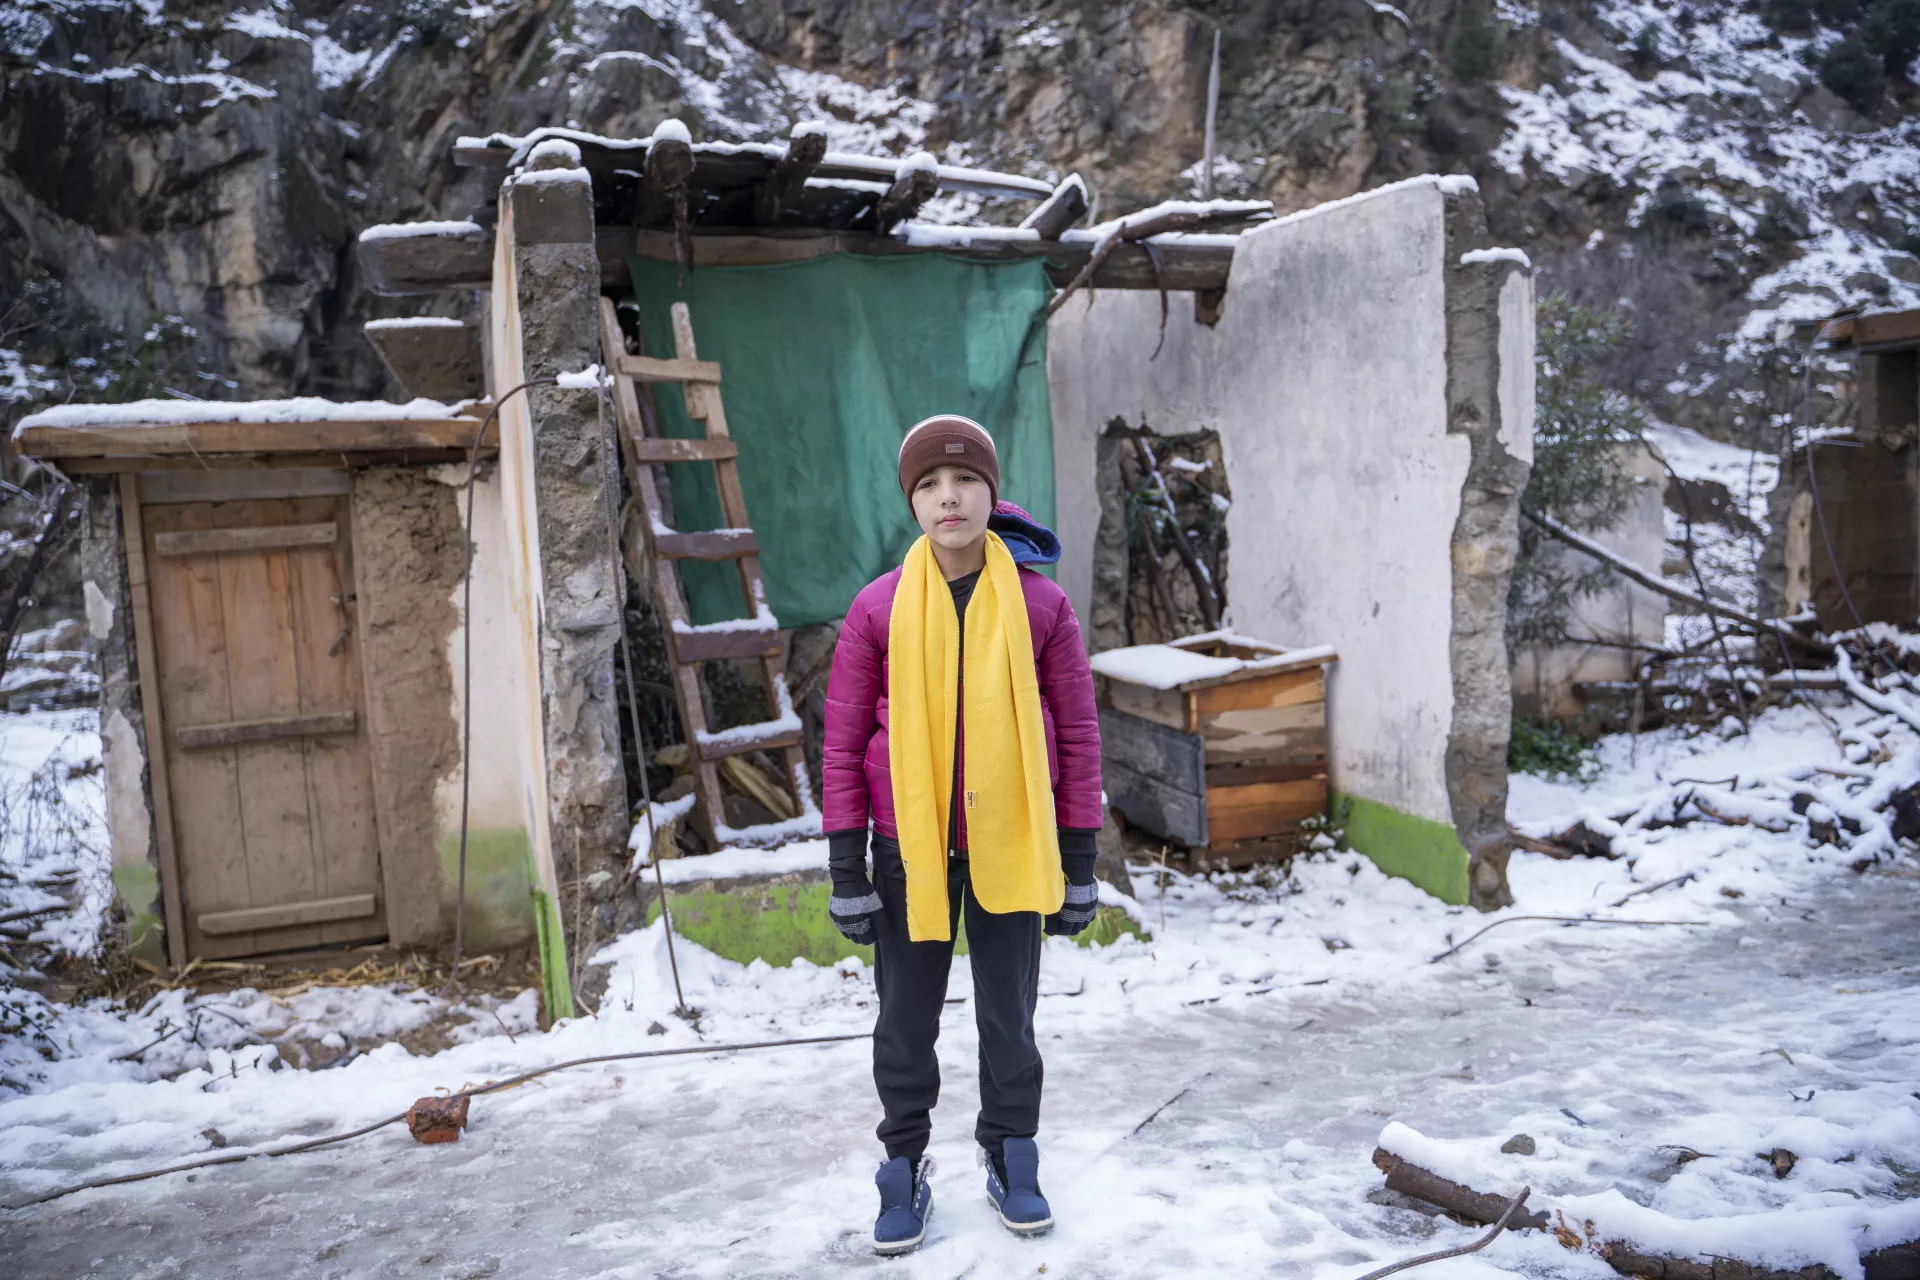 Noorullah stands in front of his damaged house in Sulool Daramdala village, Upper Dir District, Khyber Pakhtunkhwa.